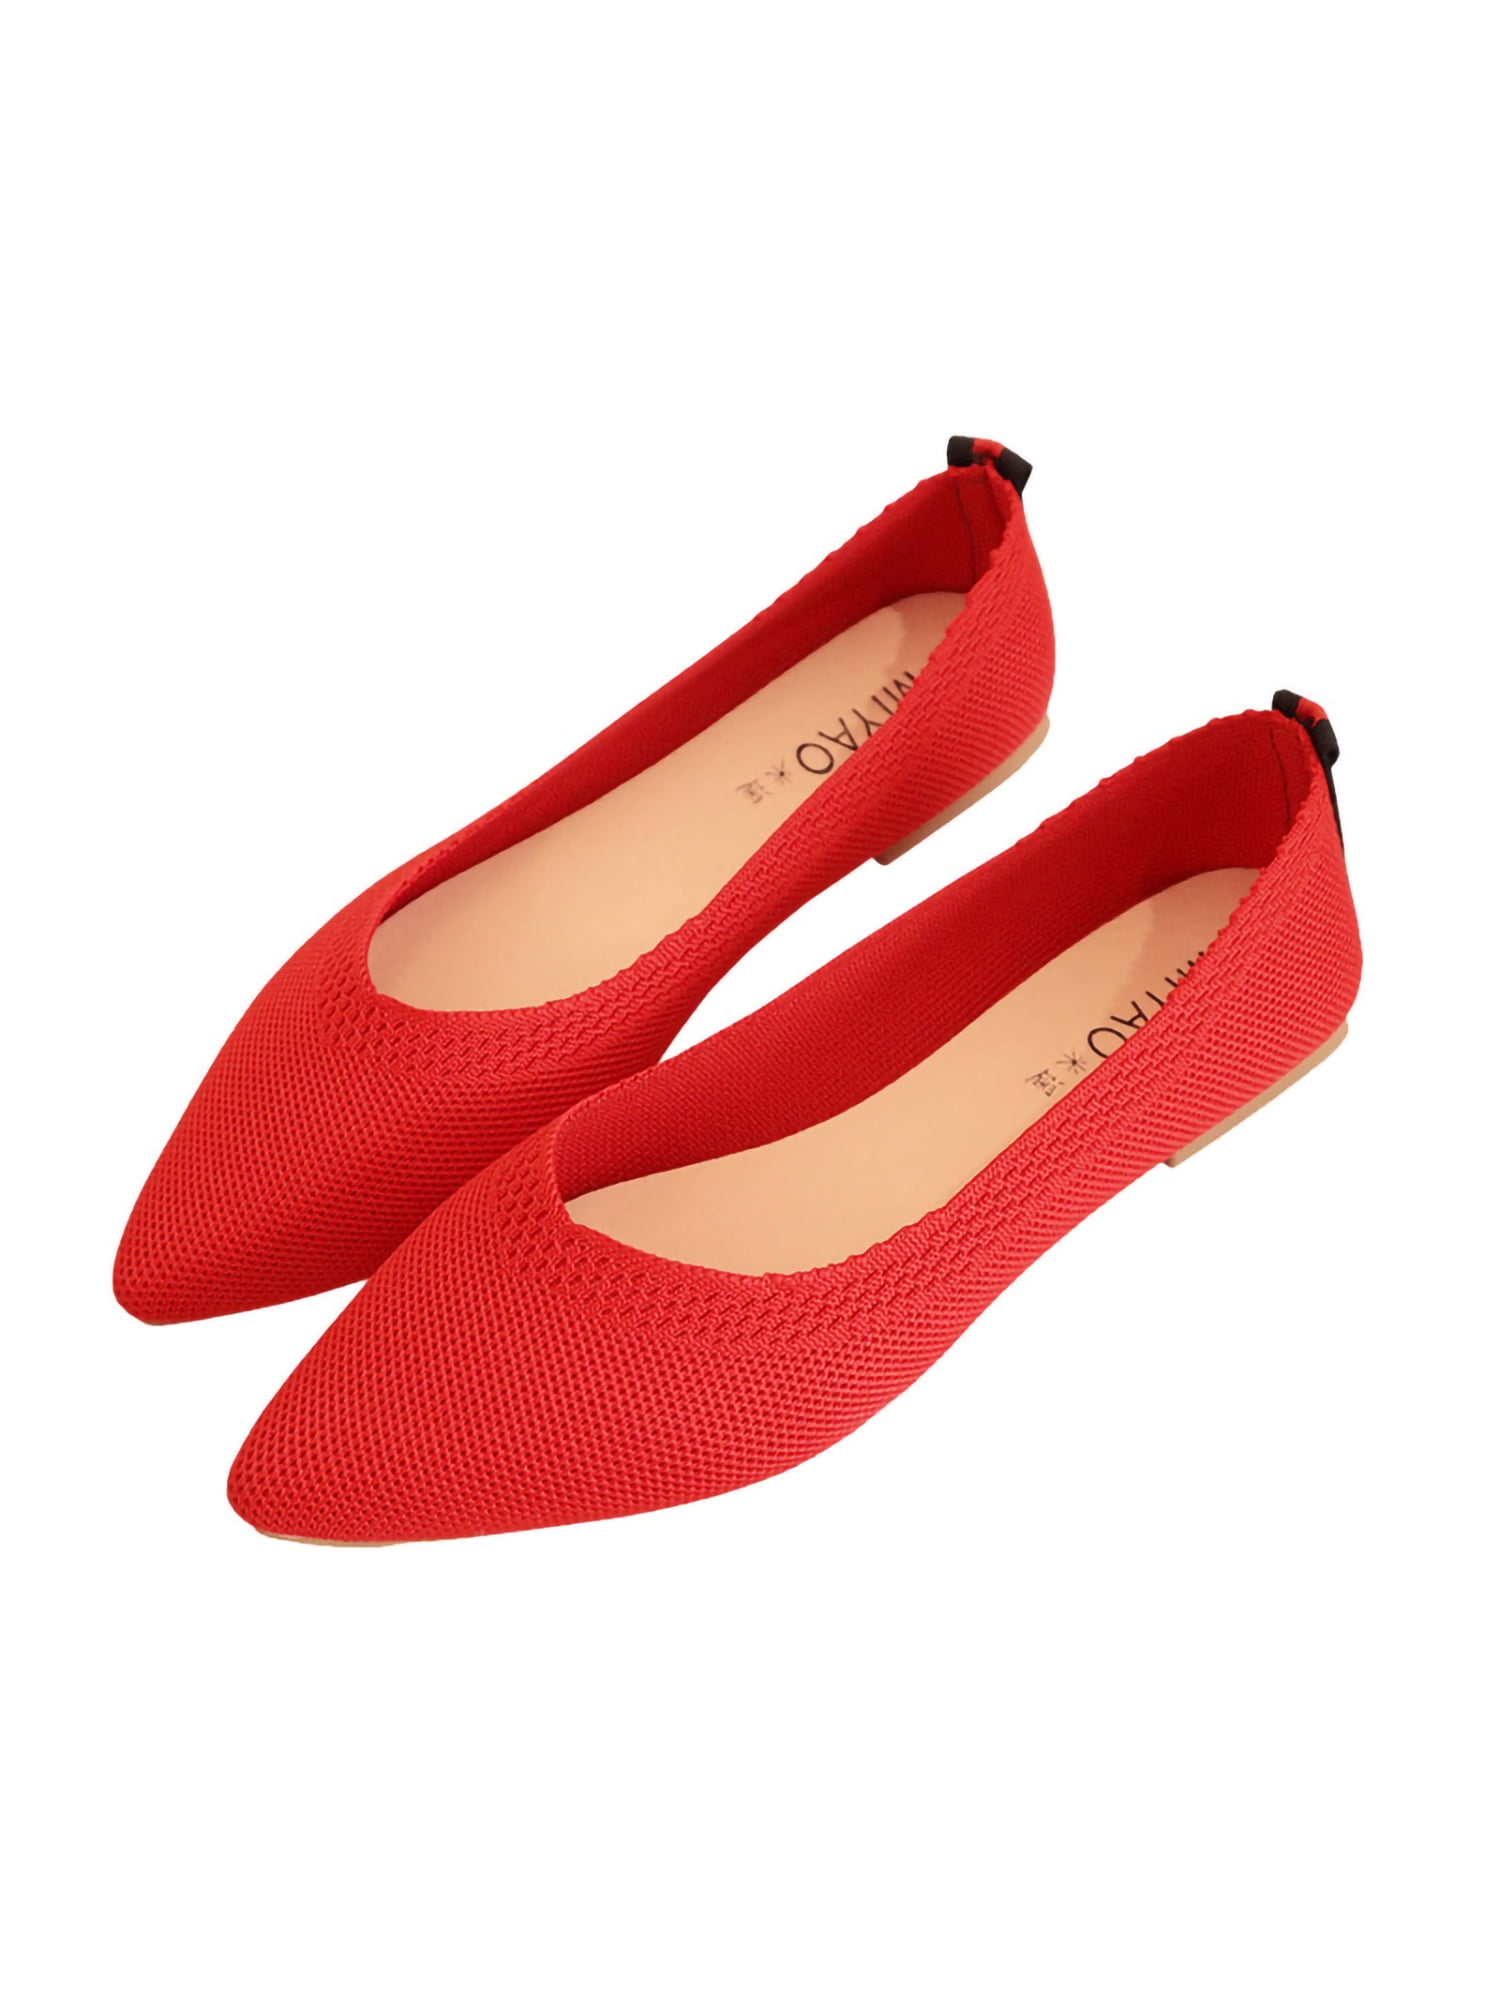 Casual Ballet Comfort Soft Slip On Flats Shoes Women's Knit Pointed Ballet Flat 